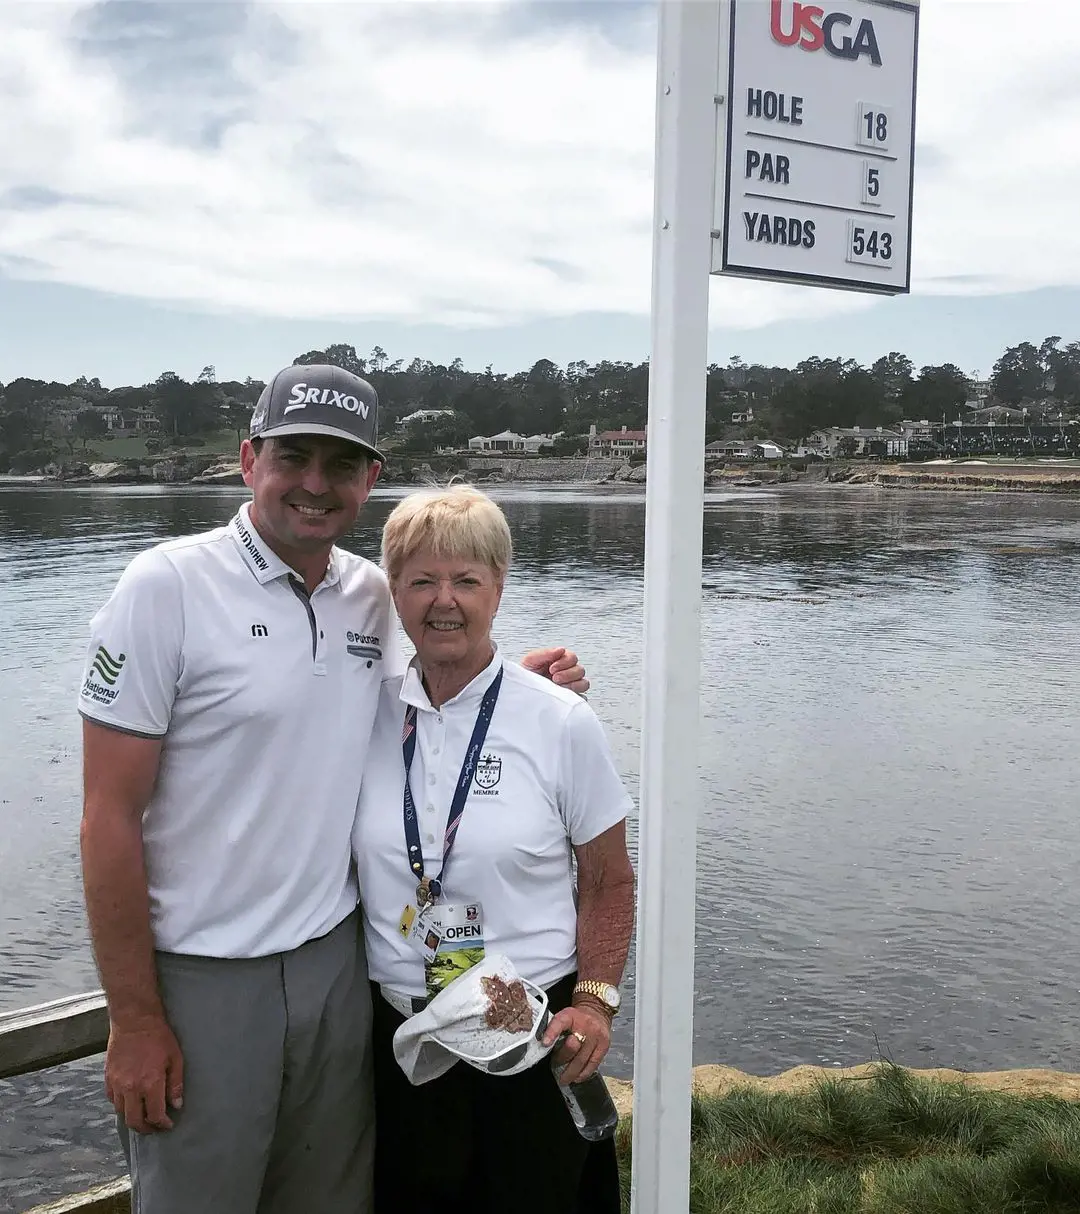 Keegan aunt Pat, a World Golf Hall of Famer, visited him during the 2019 US Open at Pebble Beach Golf Resort